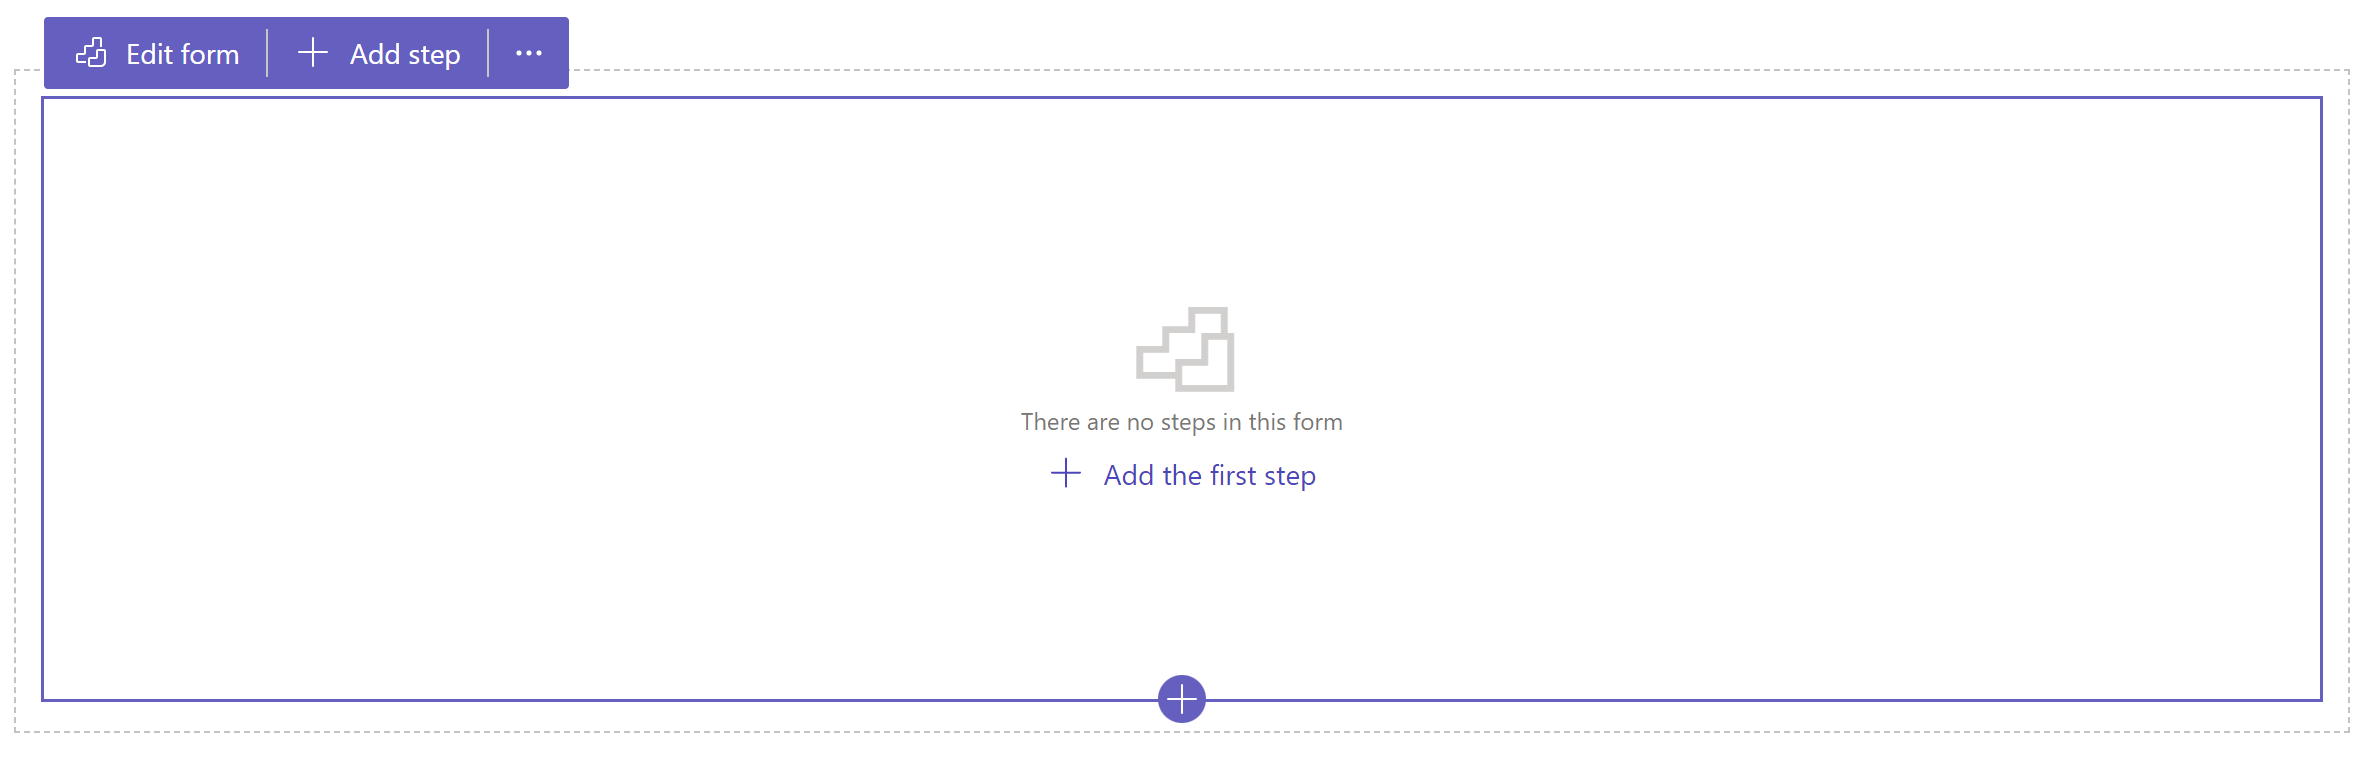 Screenshot of add the first step to the form.